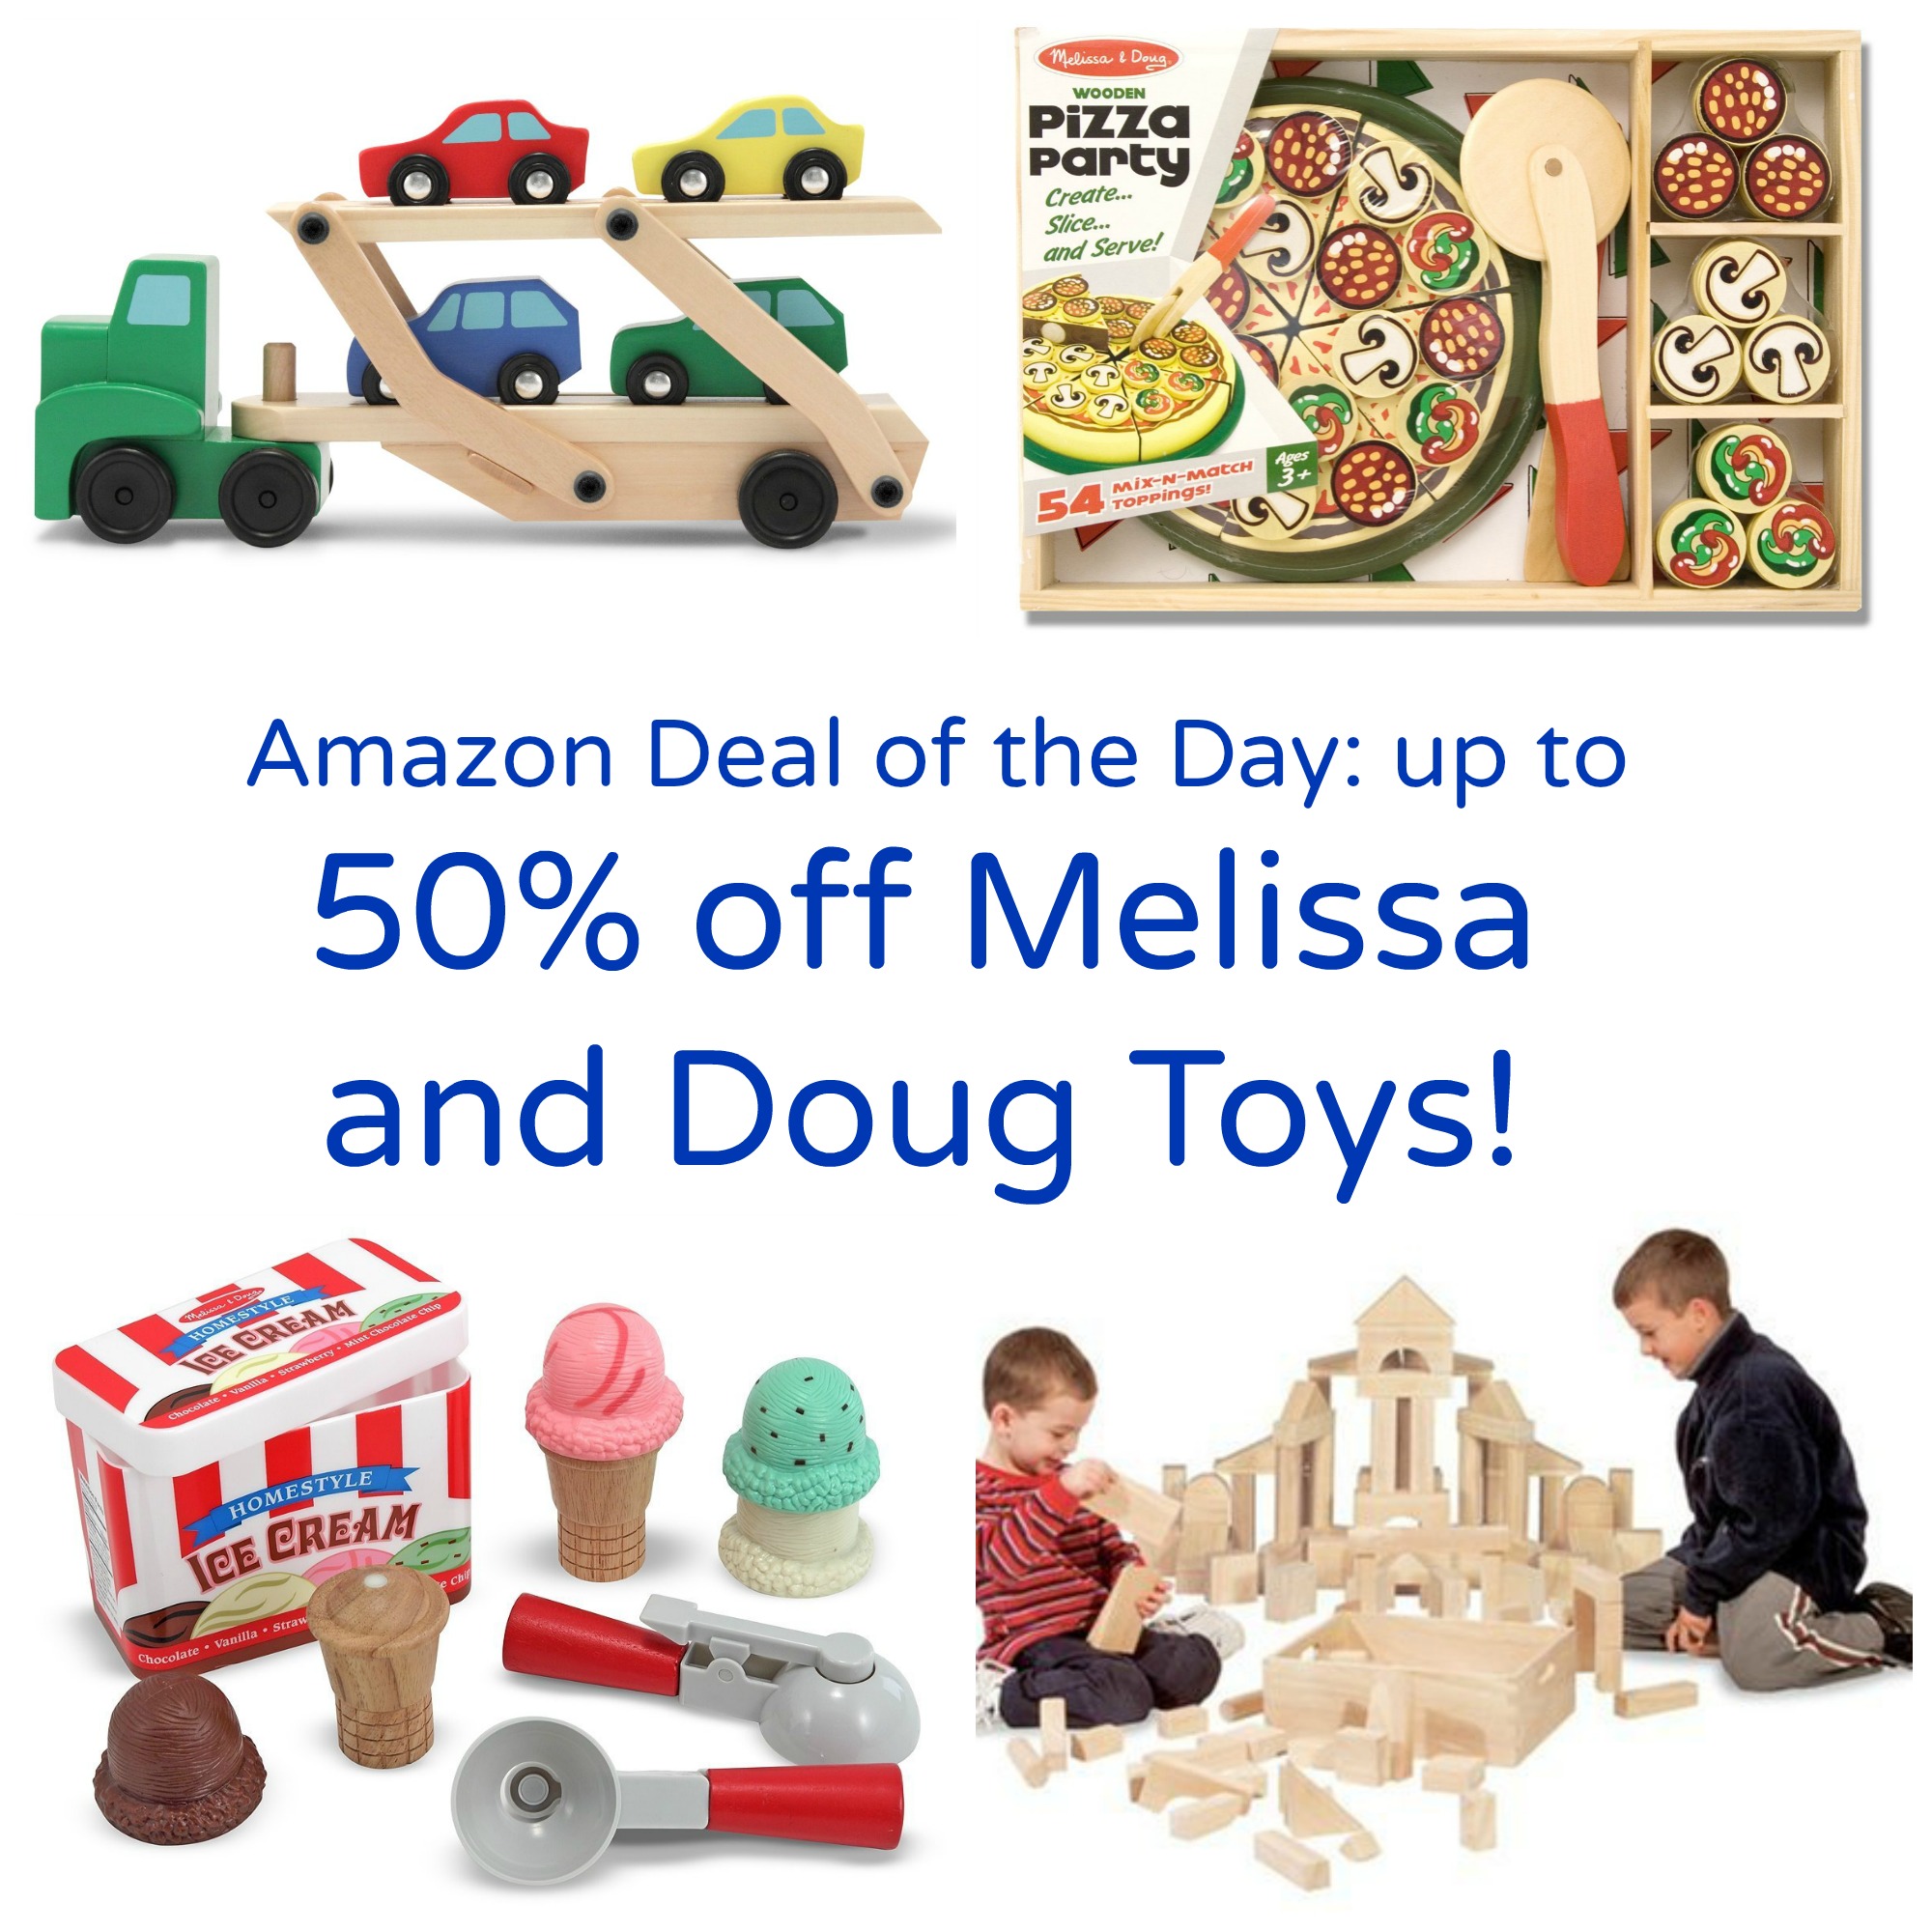 Amazon Deal of the Day: Up to 50% off Select Melissa and Doug Toys